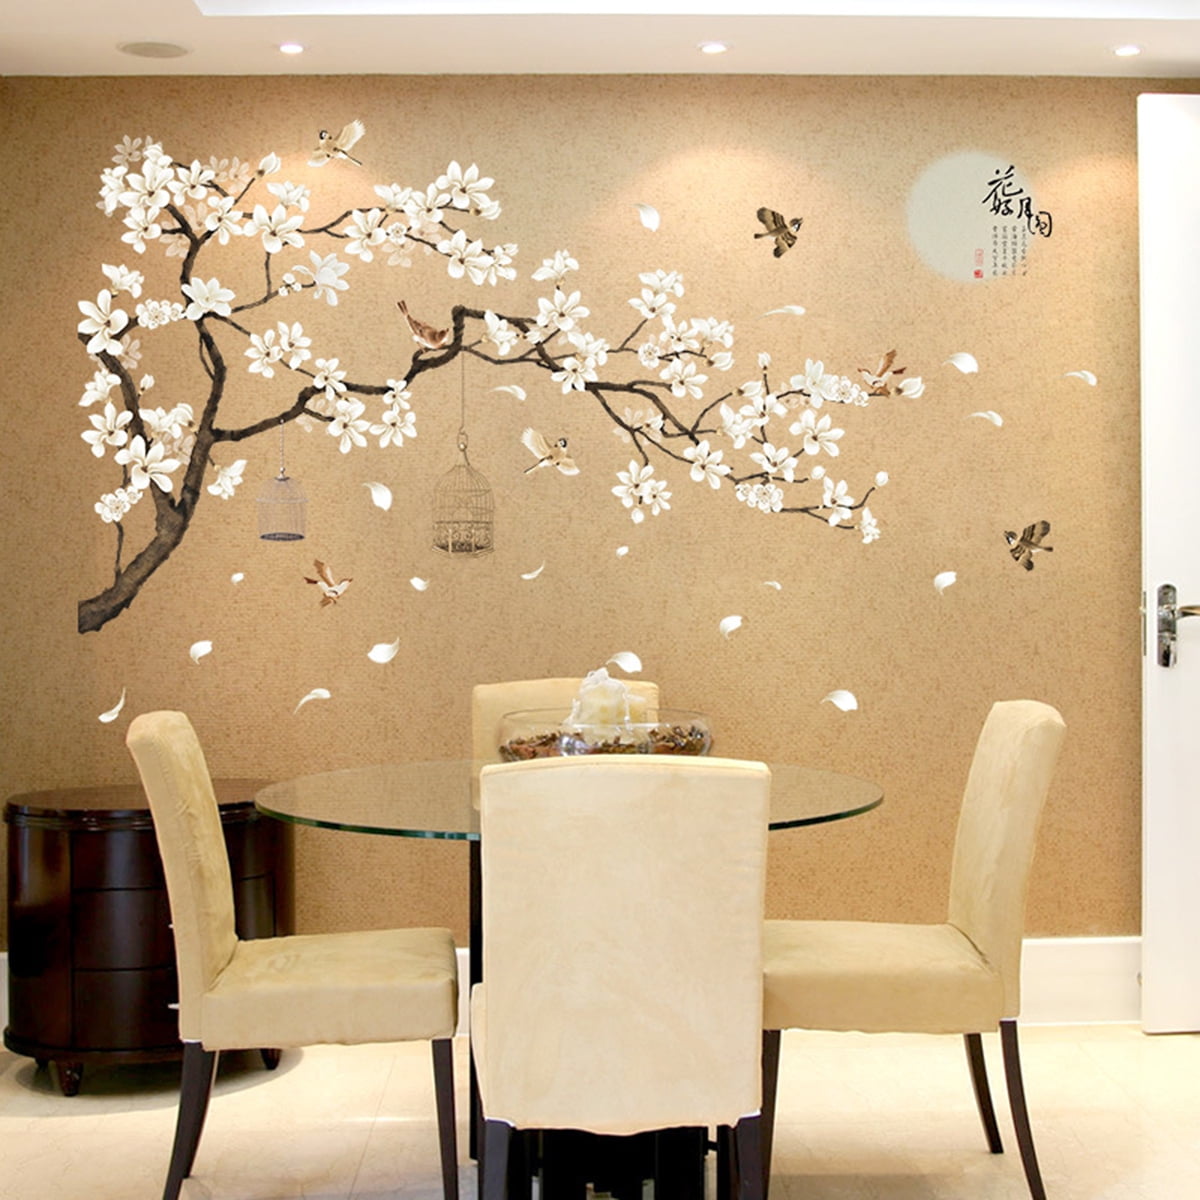 Wall Sticker Rain forest style Living Room Plant Butterfly Flower DIY Decal 